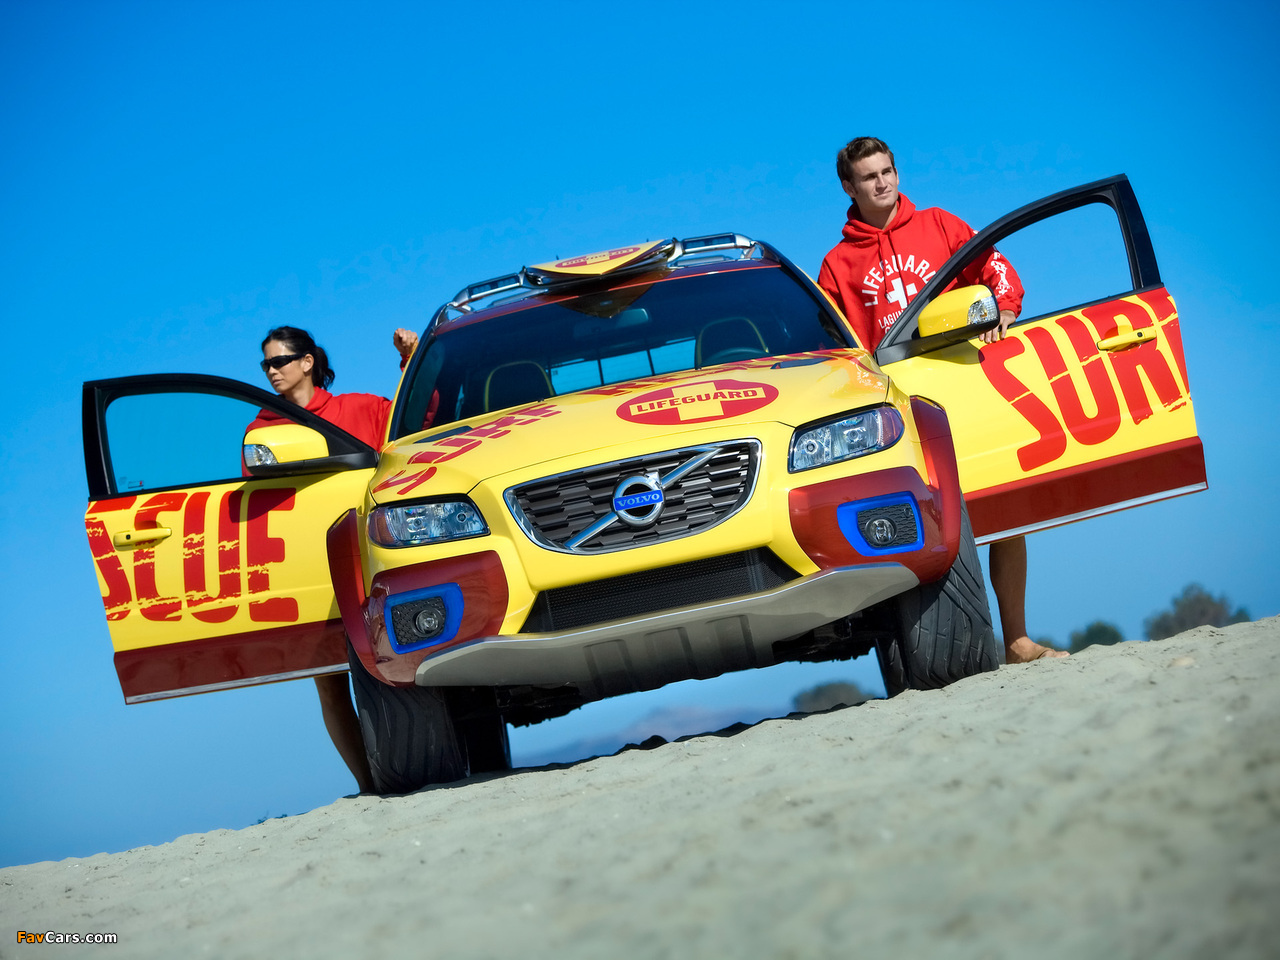 Volvo XC70 Surf Rescue Concept 2007 pictures (1280 x 960)